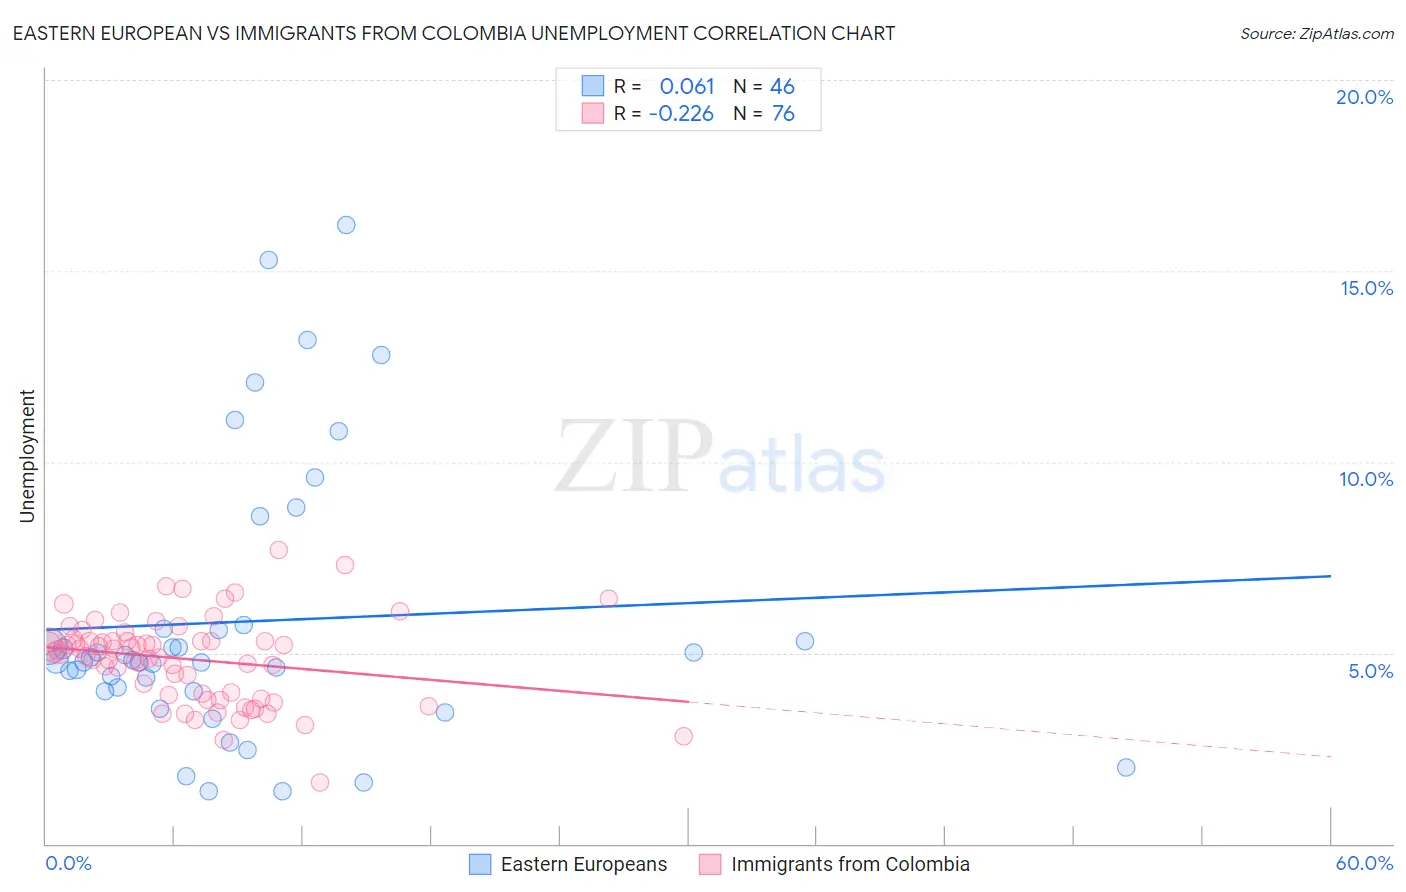 Eastern European vs Immigrants from Colombia Unemployment